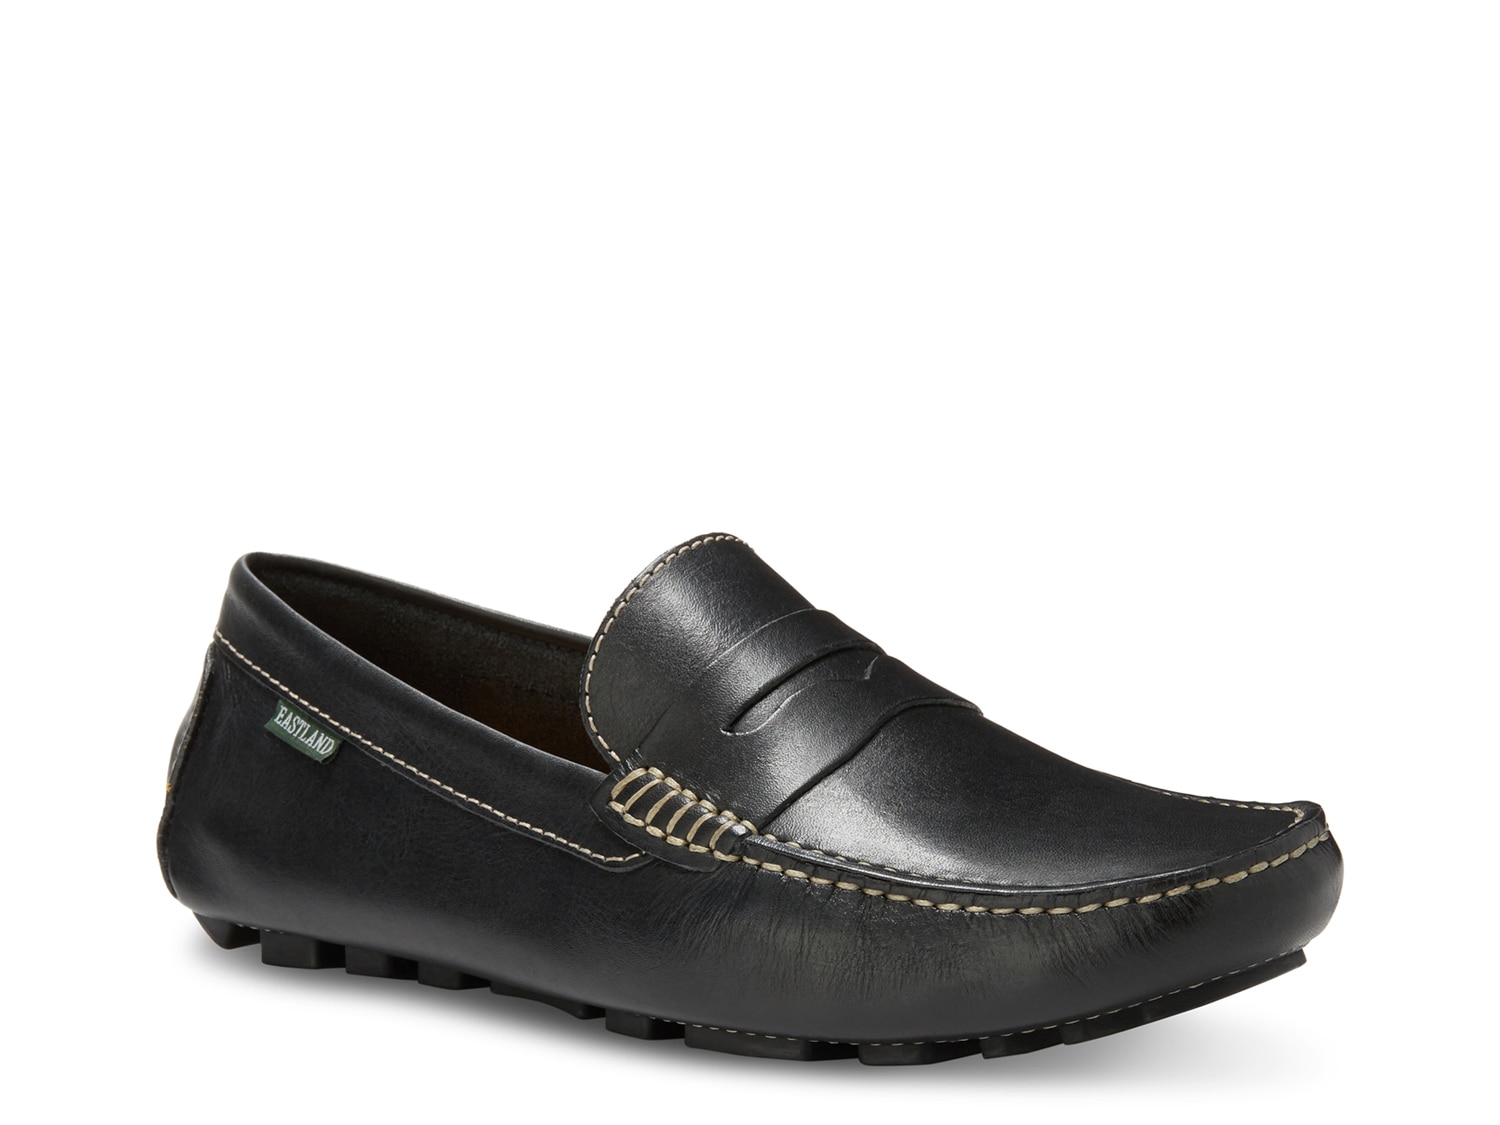 Eastland Patrick Driving Moccasin - Free Shipping | DSW